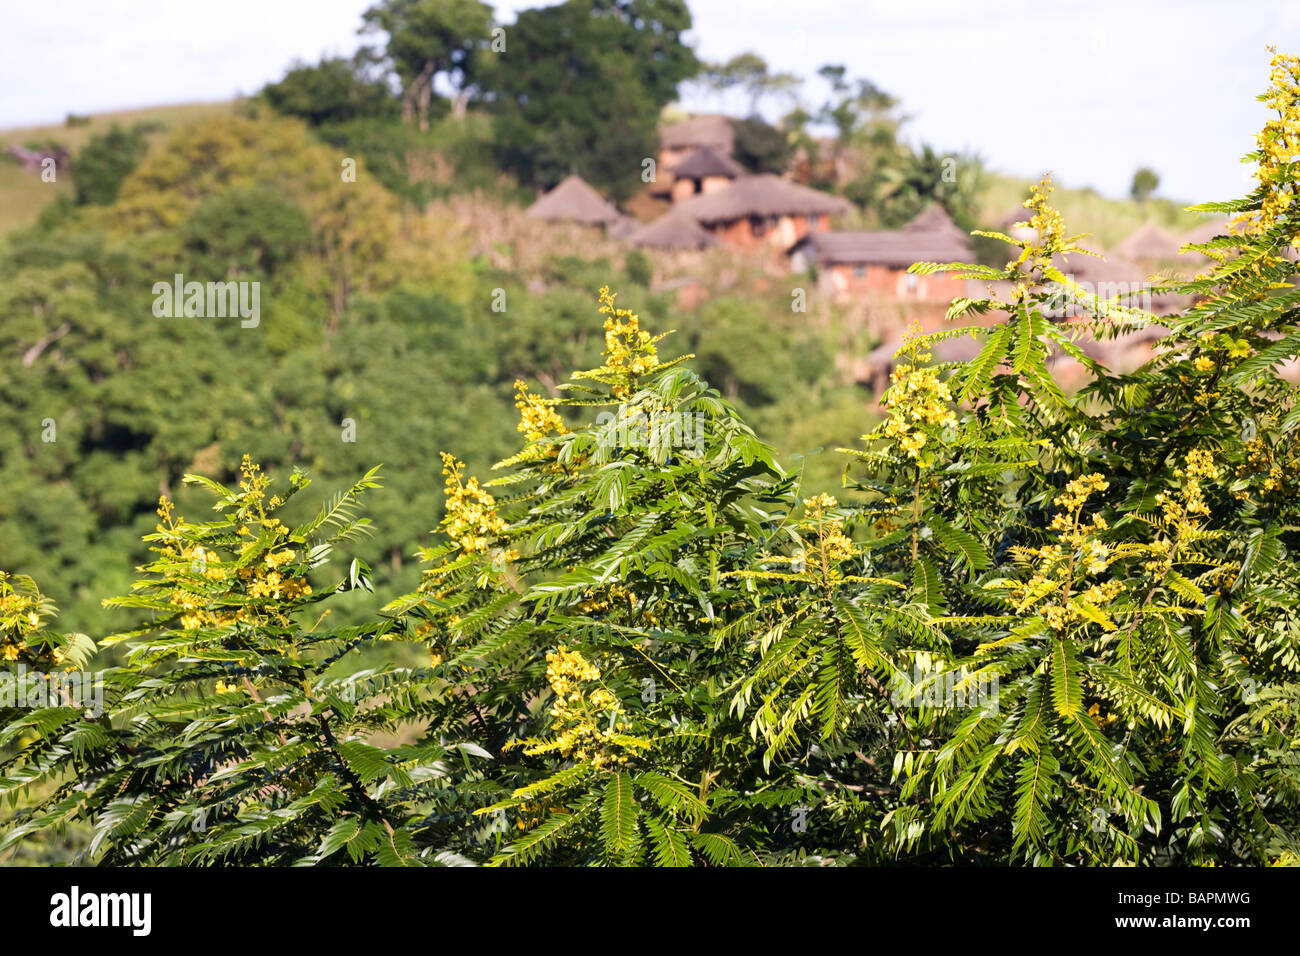 Acacia trees in flower at a traditional village in the Kirk Range east of Dedza, Malawi, Africa Stock Photo